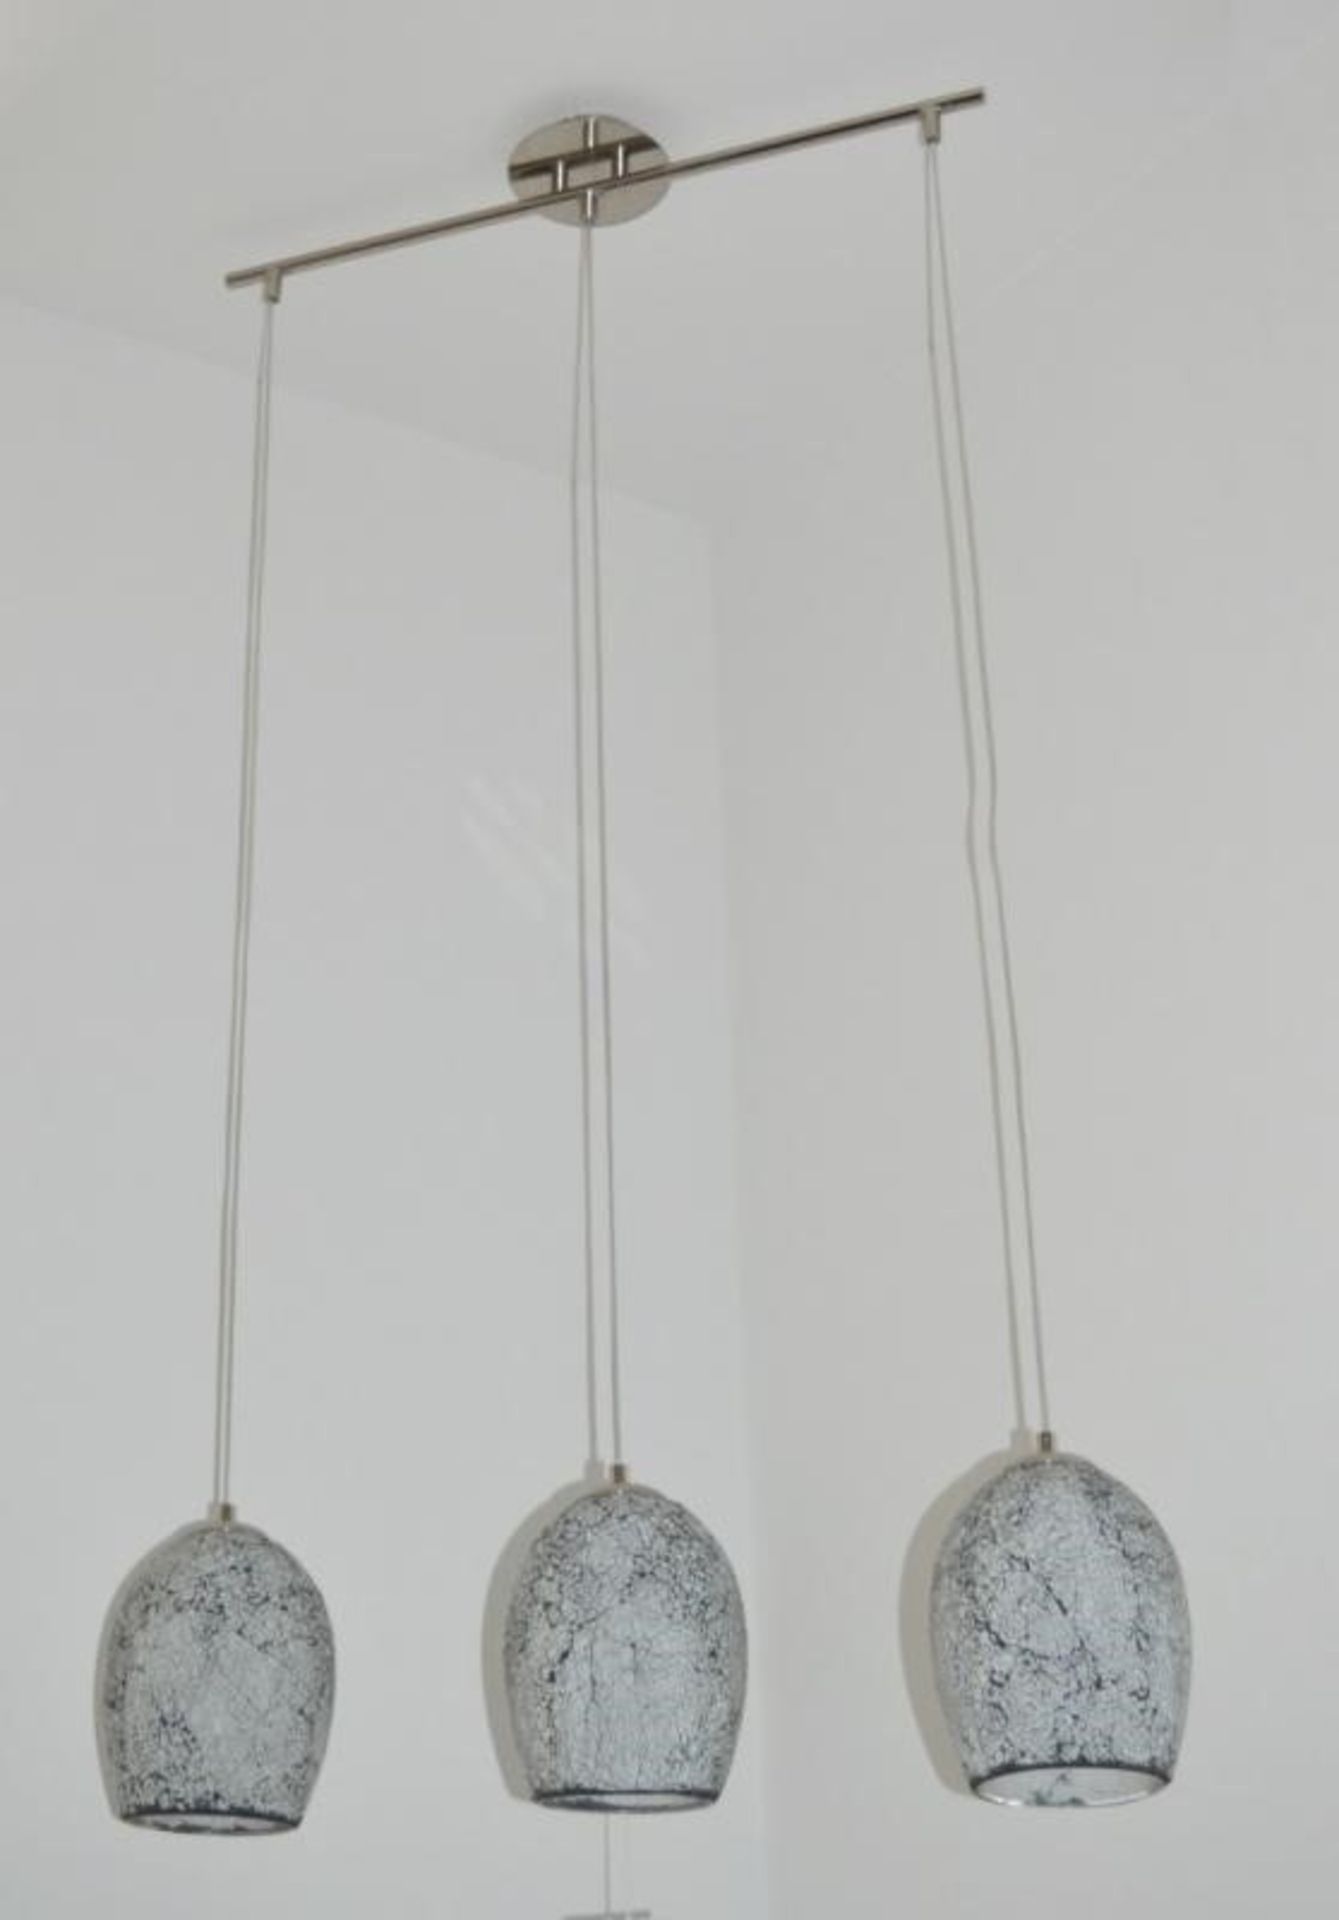 1 x Crackle White Mosaic Glass 3 Light Fitting With Dome Shades and Satin Silver Trim - Ex Display S - Image 4 of 5